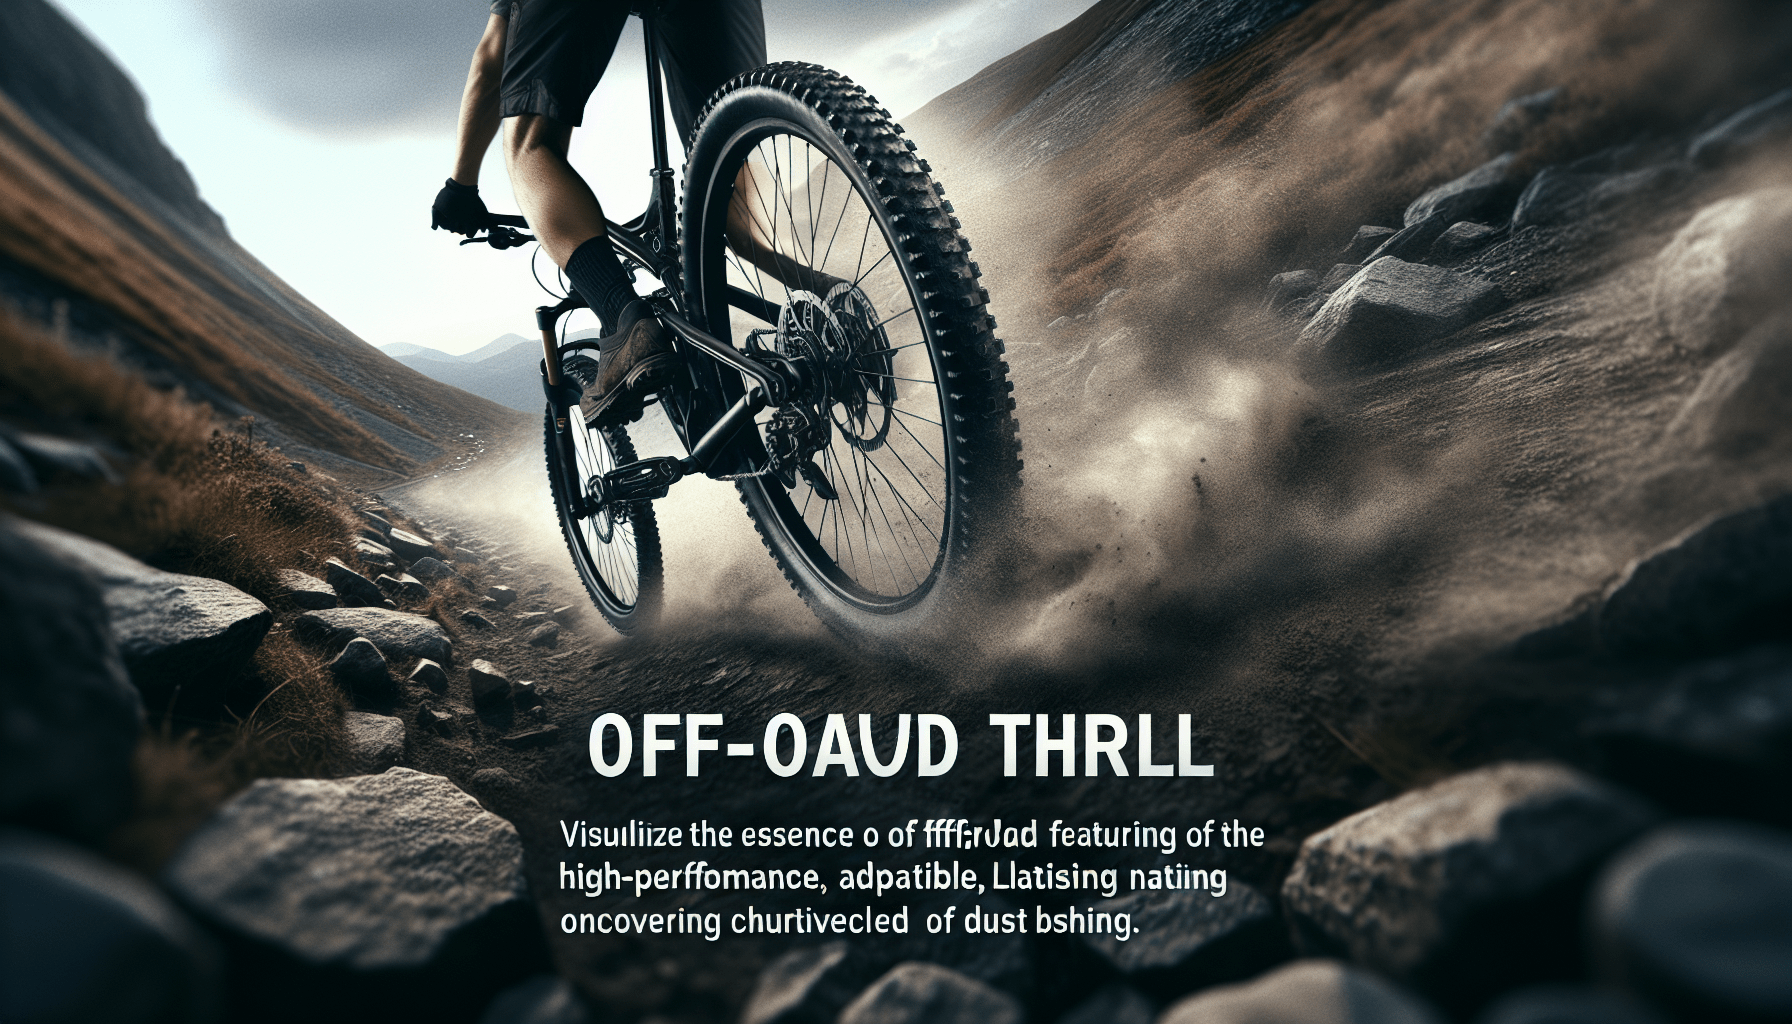 Fuel Your Off-Road Dreams: Discover The Top 3 Reilly T640D Bikes Today!